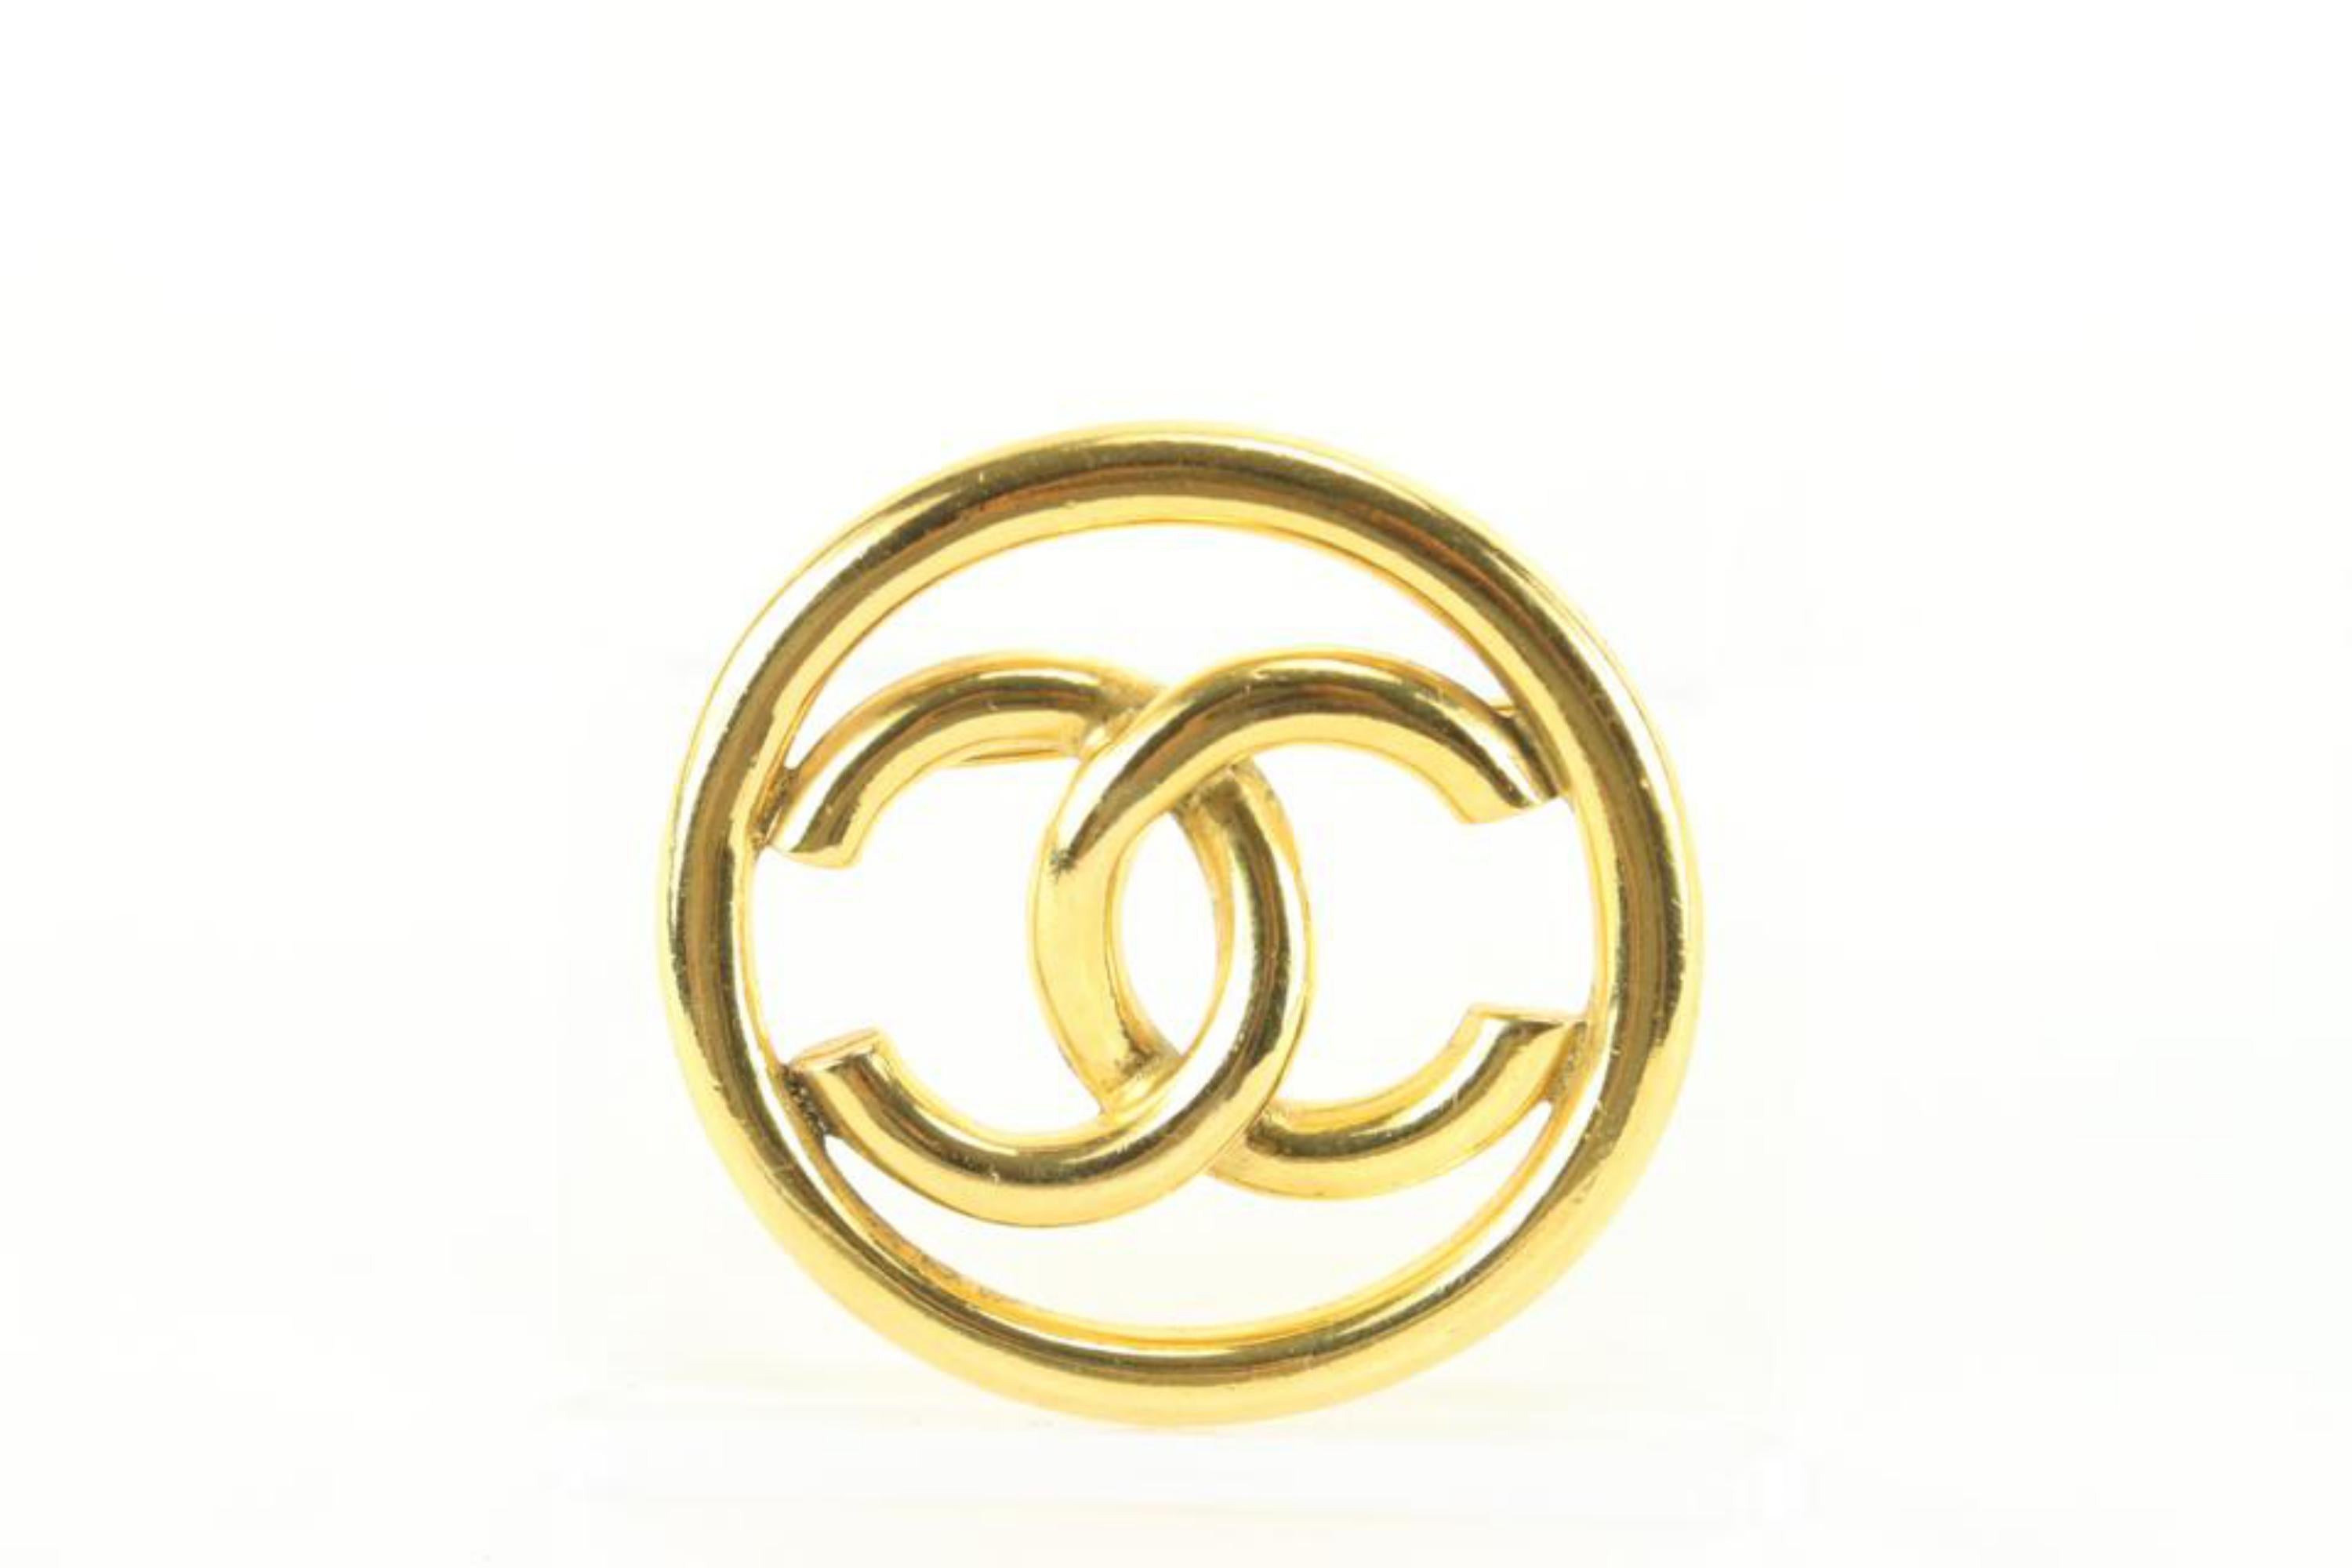 Chanel 93P 24k Gold Plate CC Logo Circle Brooch Pin 31ck824s For Sale ...